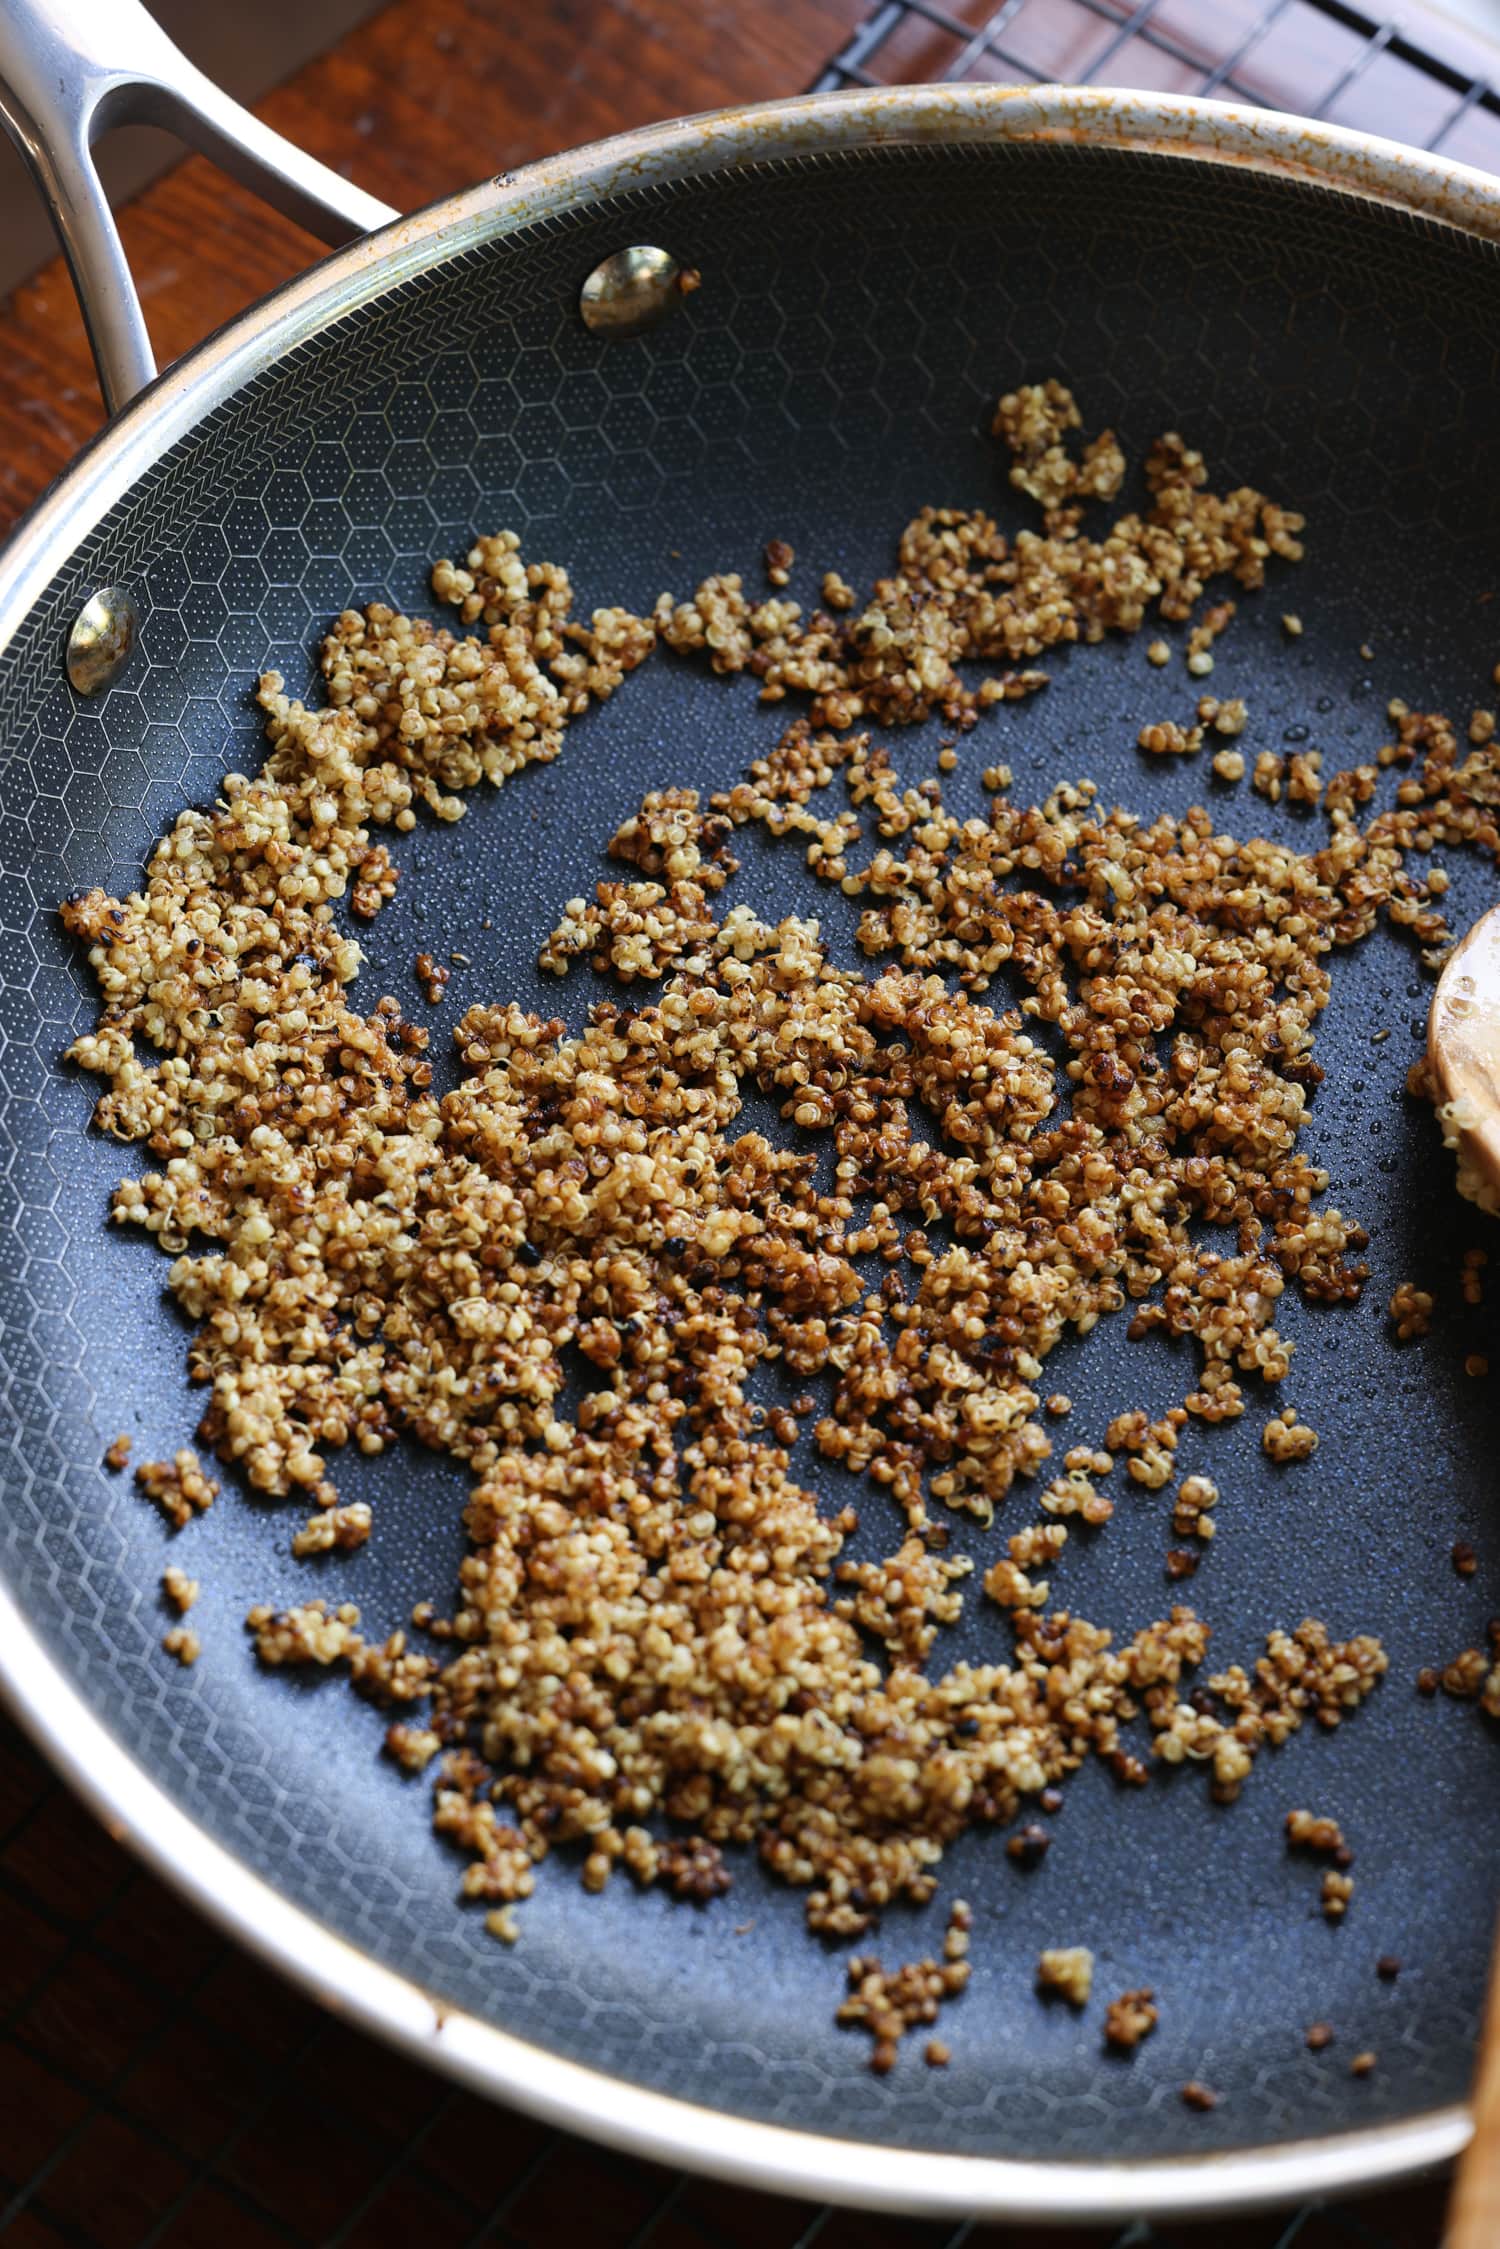 Quinoa baked in a frying pan